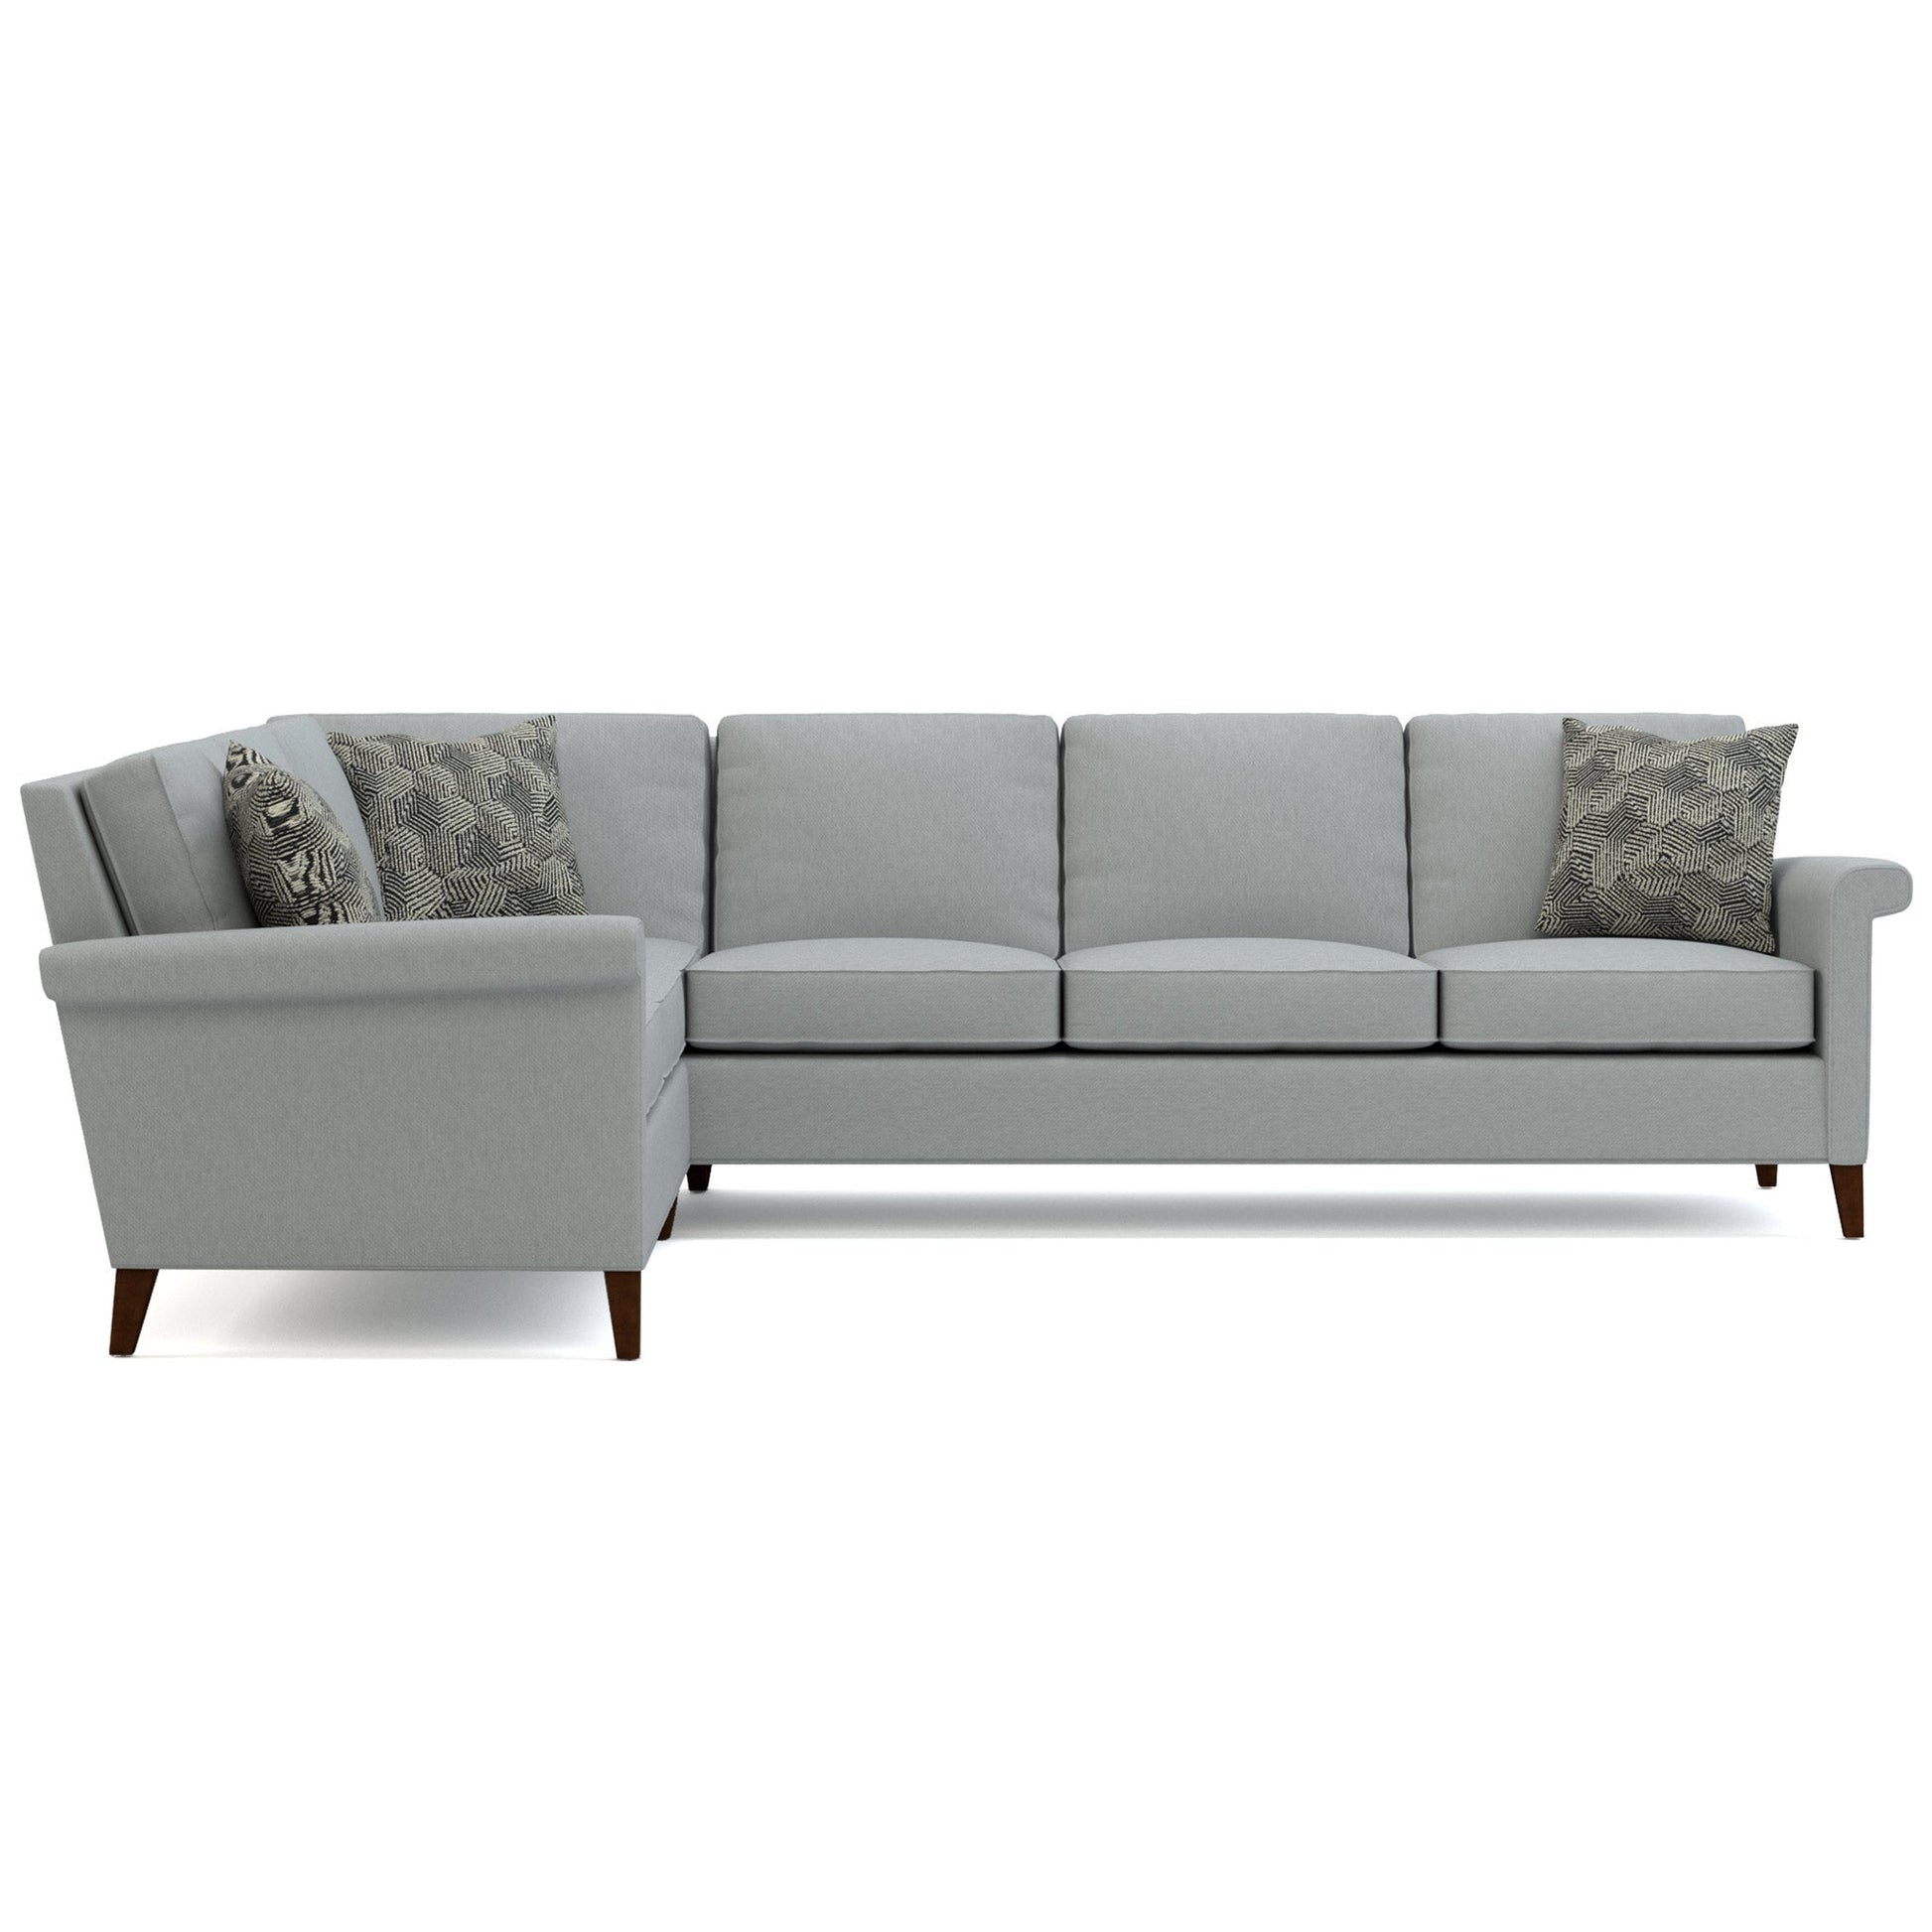 Belleville Sectional Fabric 4870-35